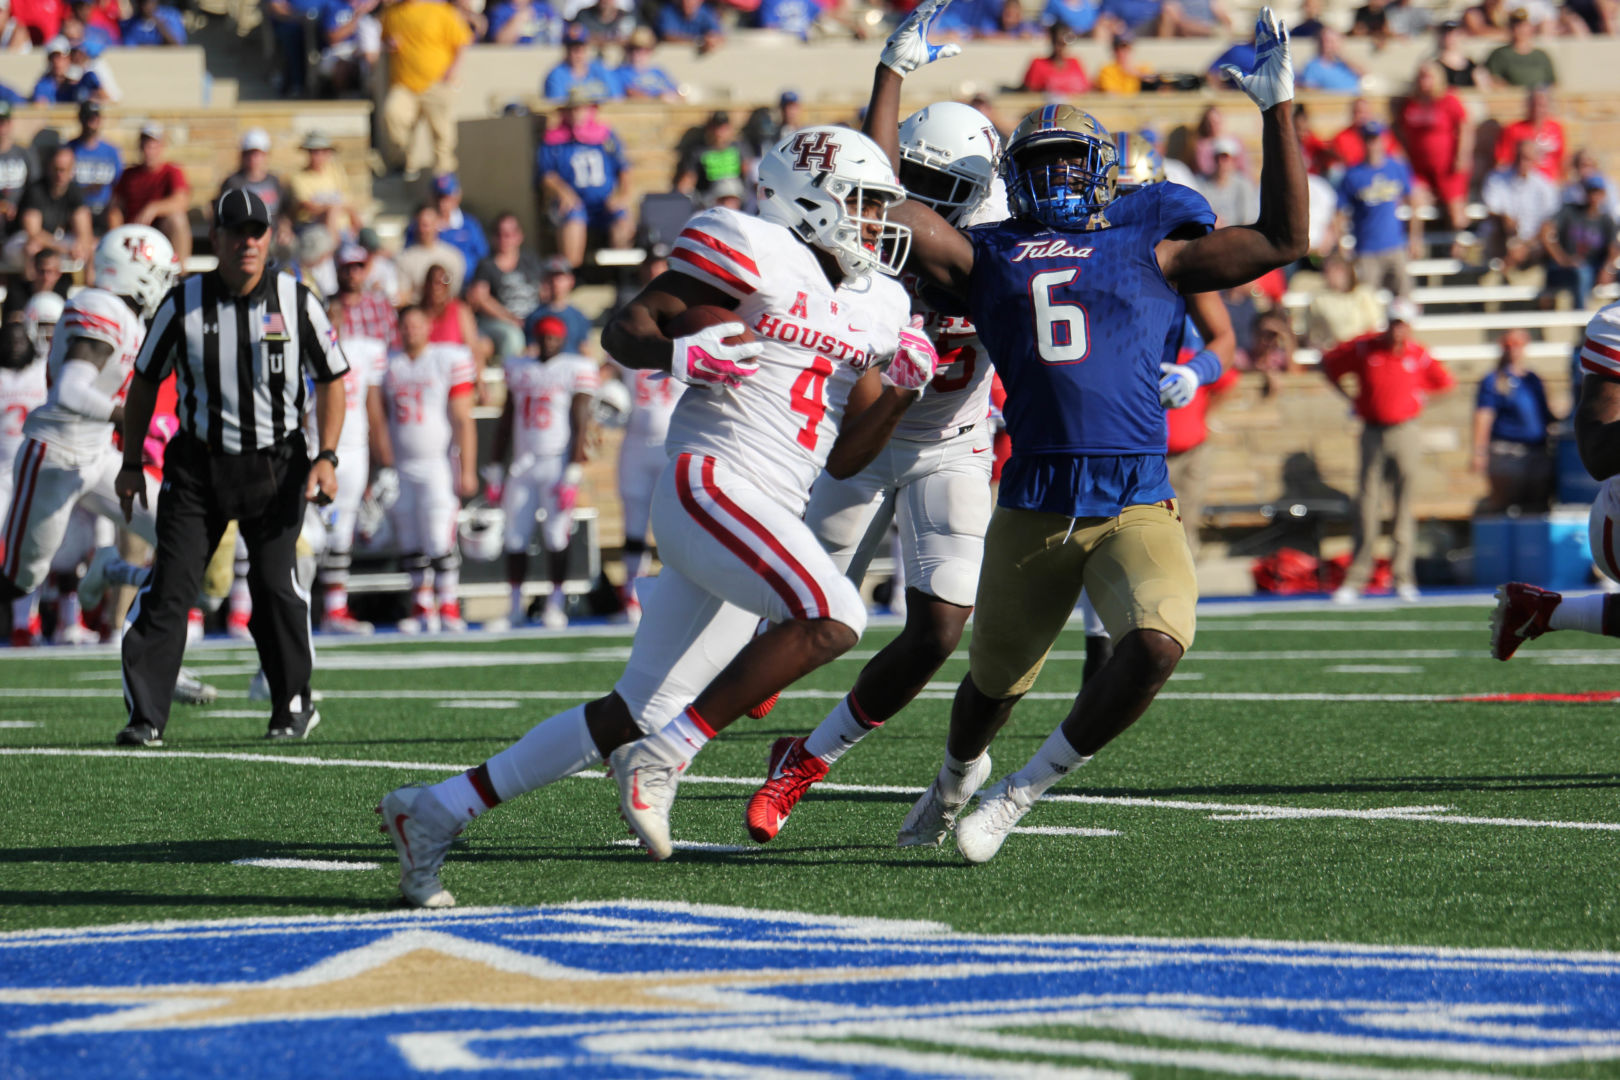 Houston took down Tulsa in the two teams' October 2018 matchup, beating the Golden Hurricane 41-26. | File photo